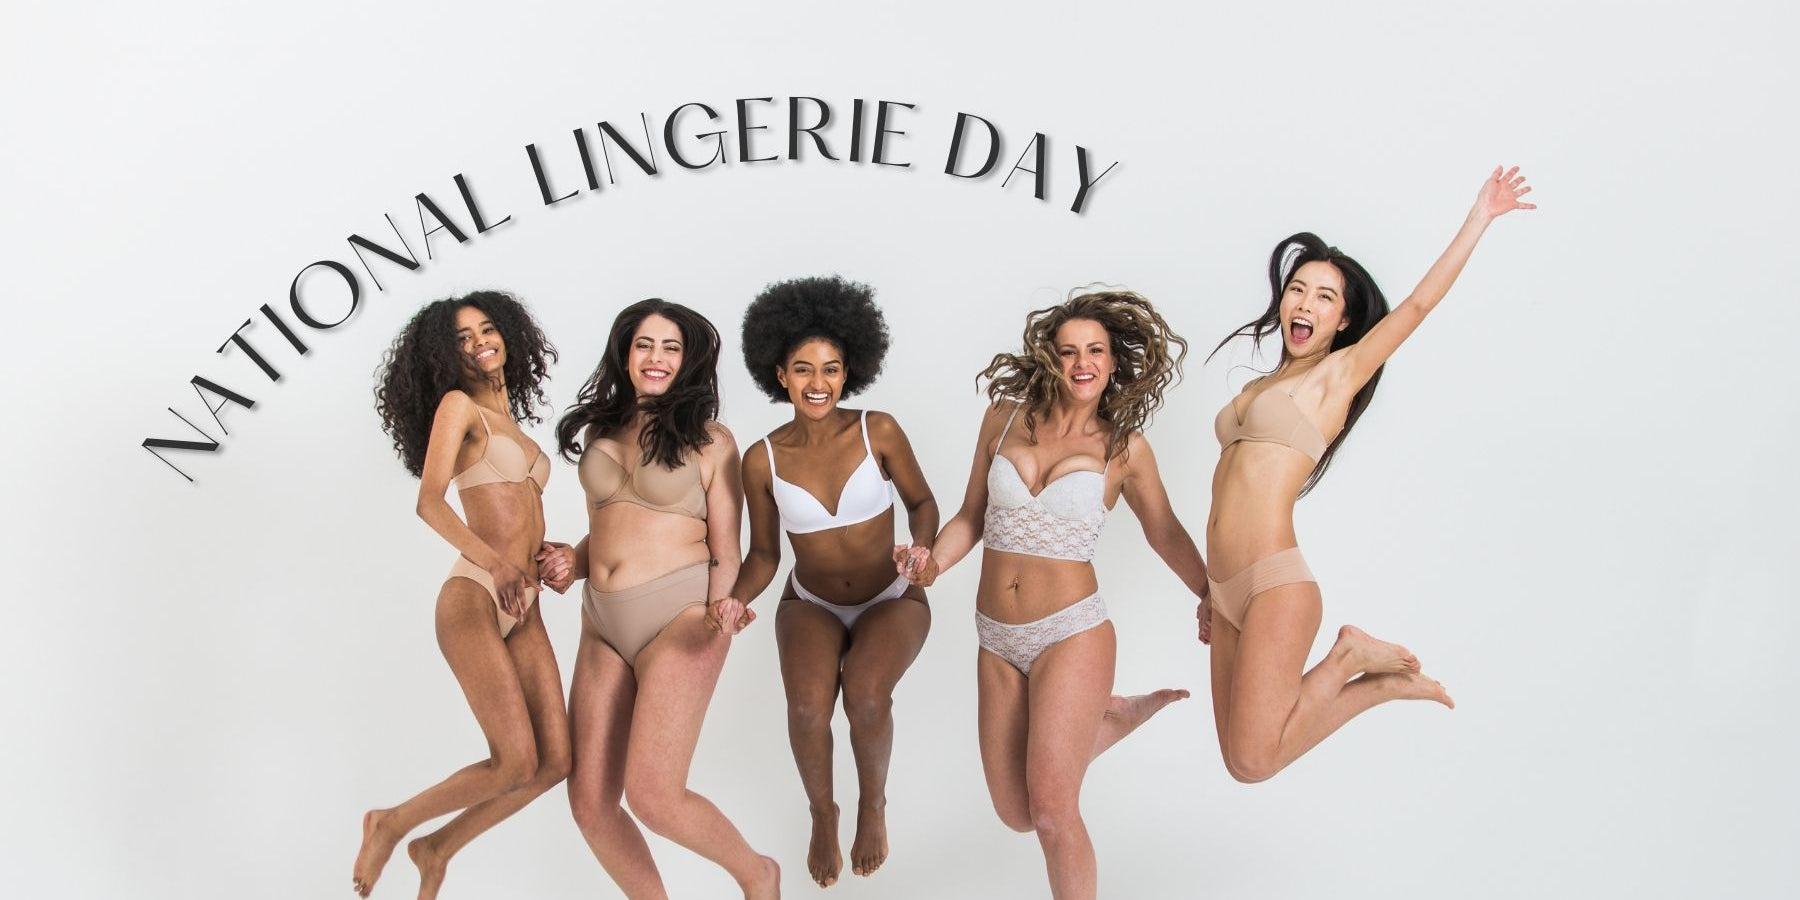 How to Celebrate National Lingerie Day in 4 Fun Ways